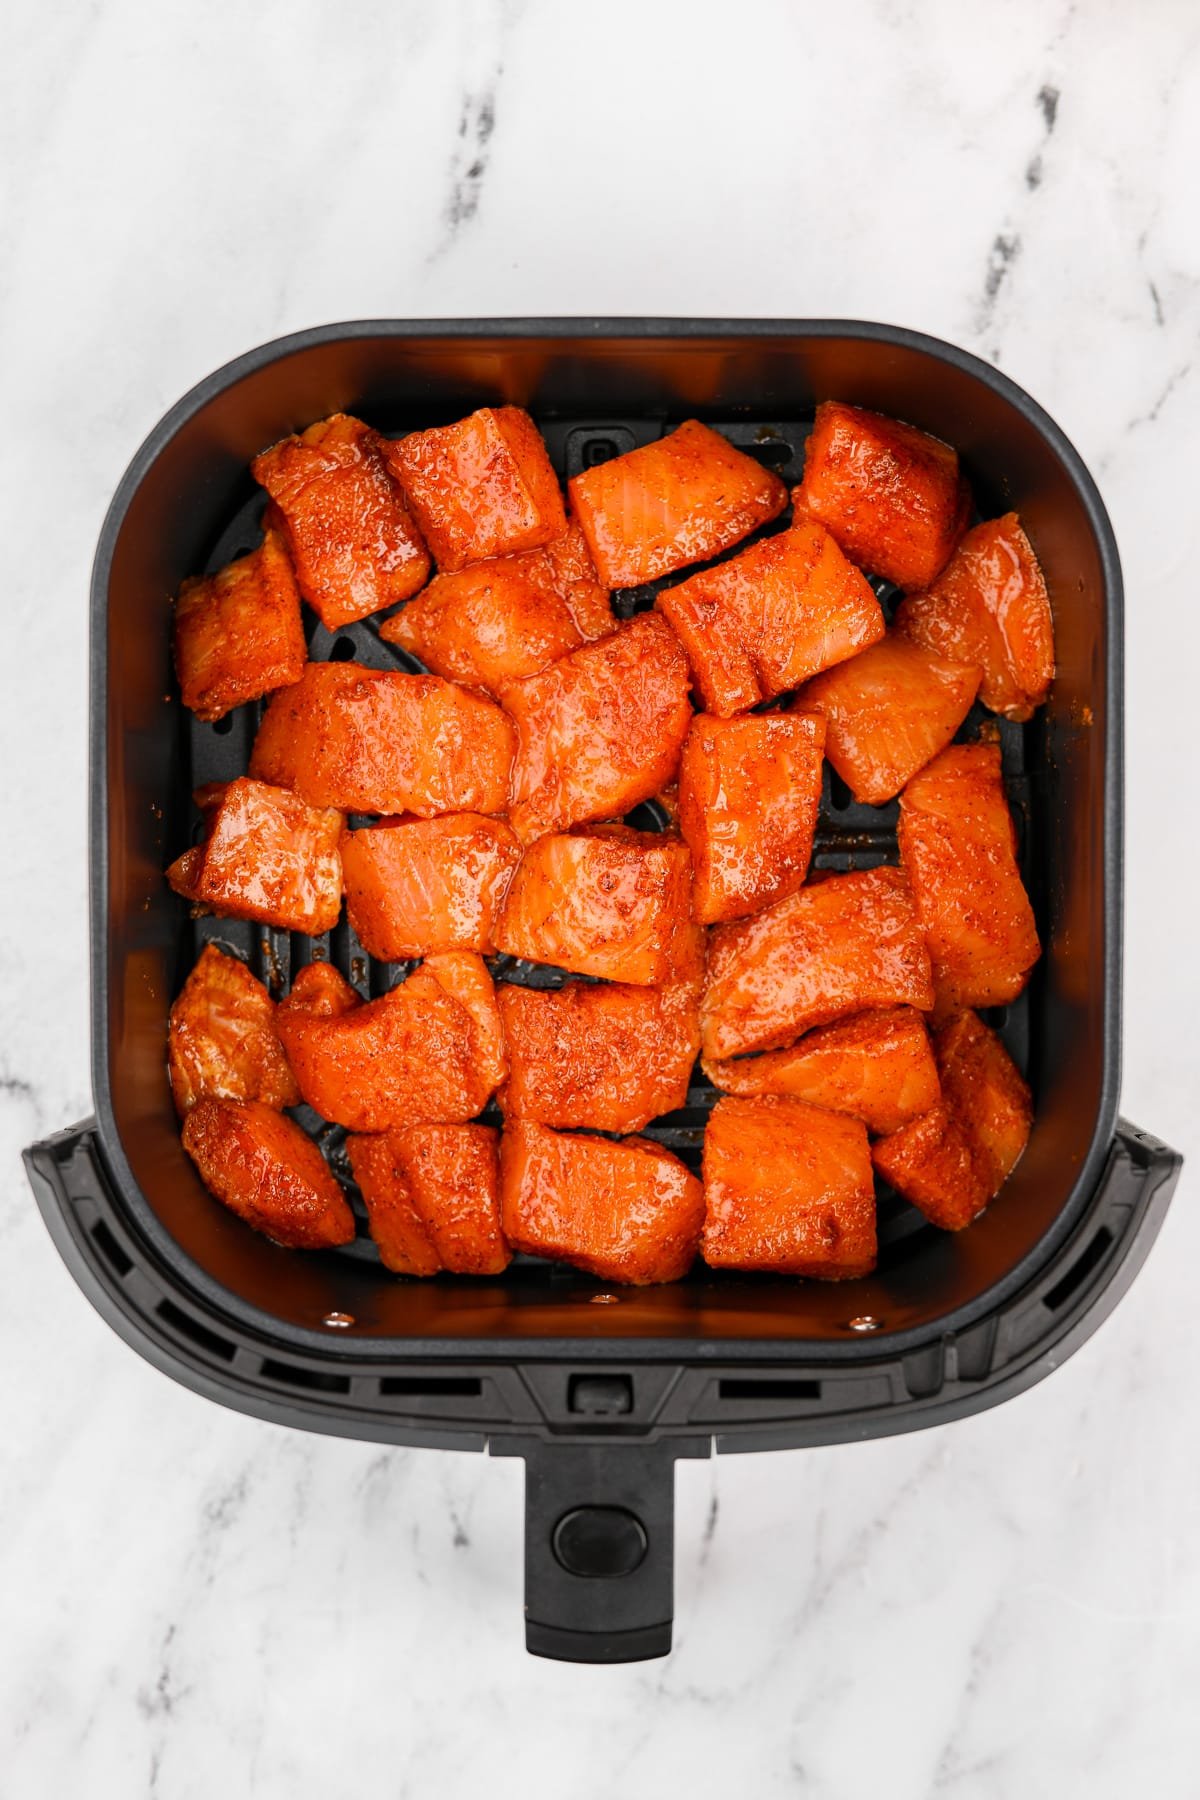 An air fryer basket filled with seasoned salmon chunks.